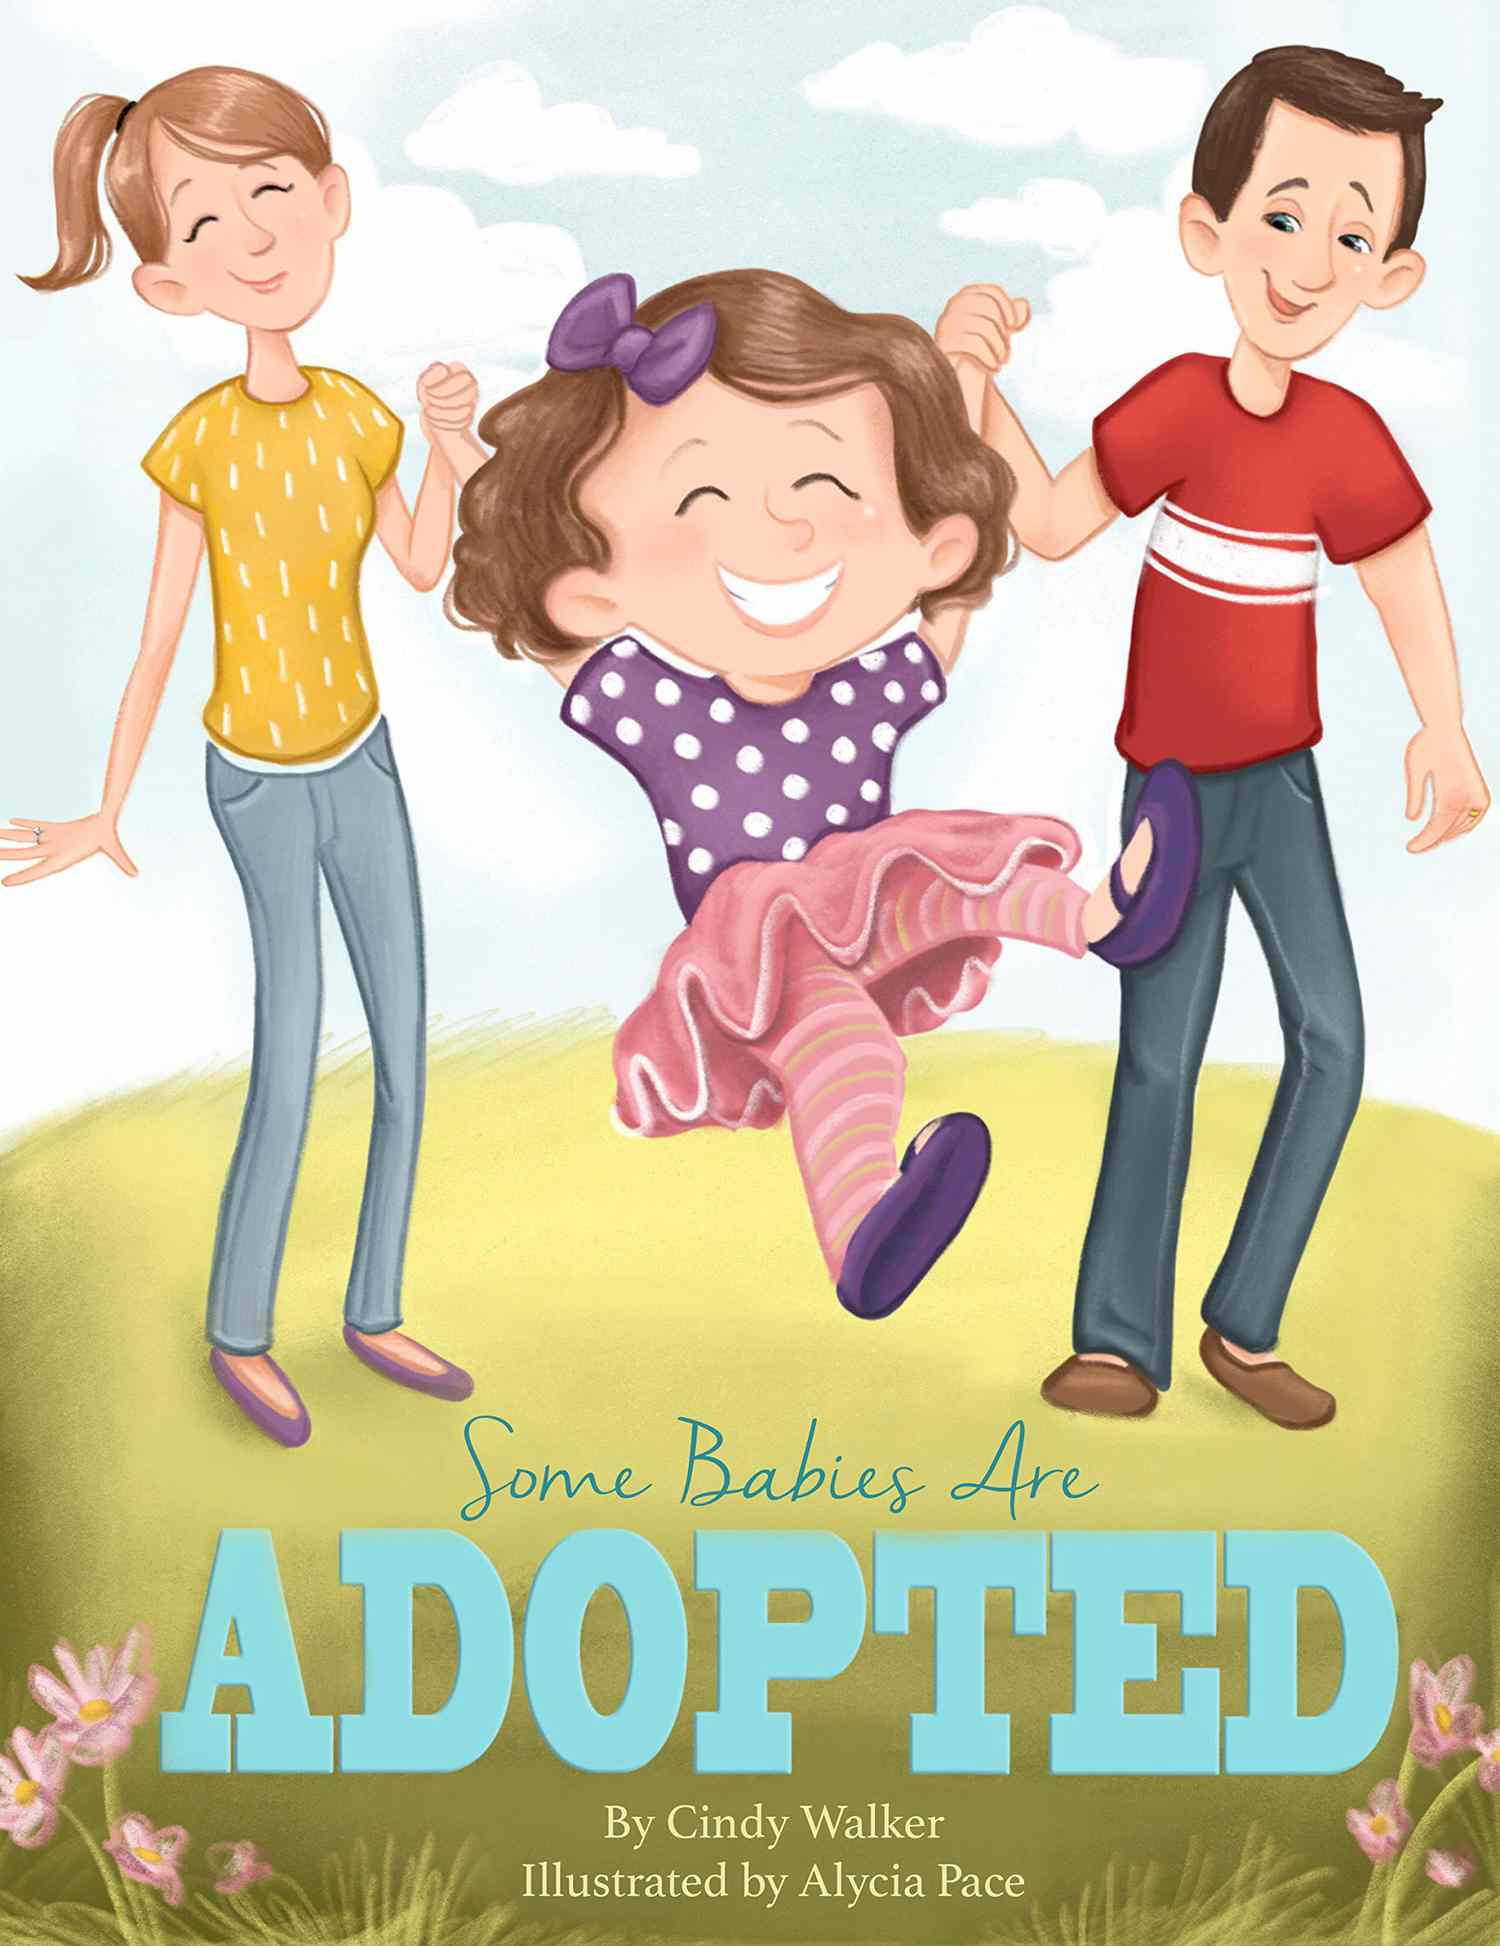 Some Babies Are Adopted book